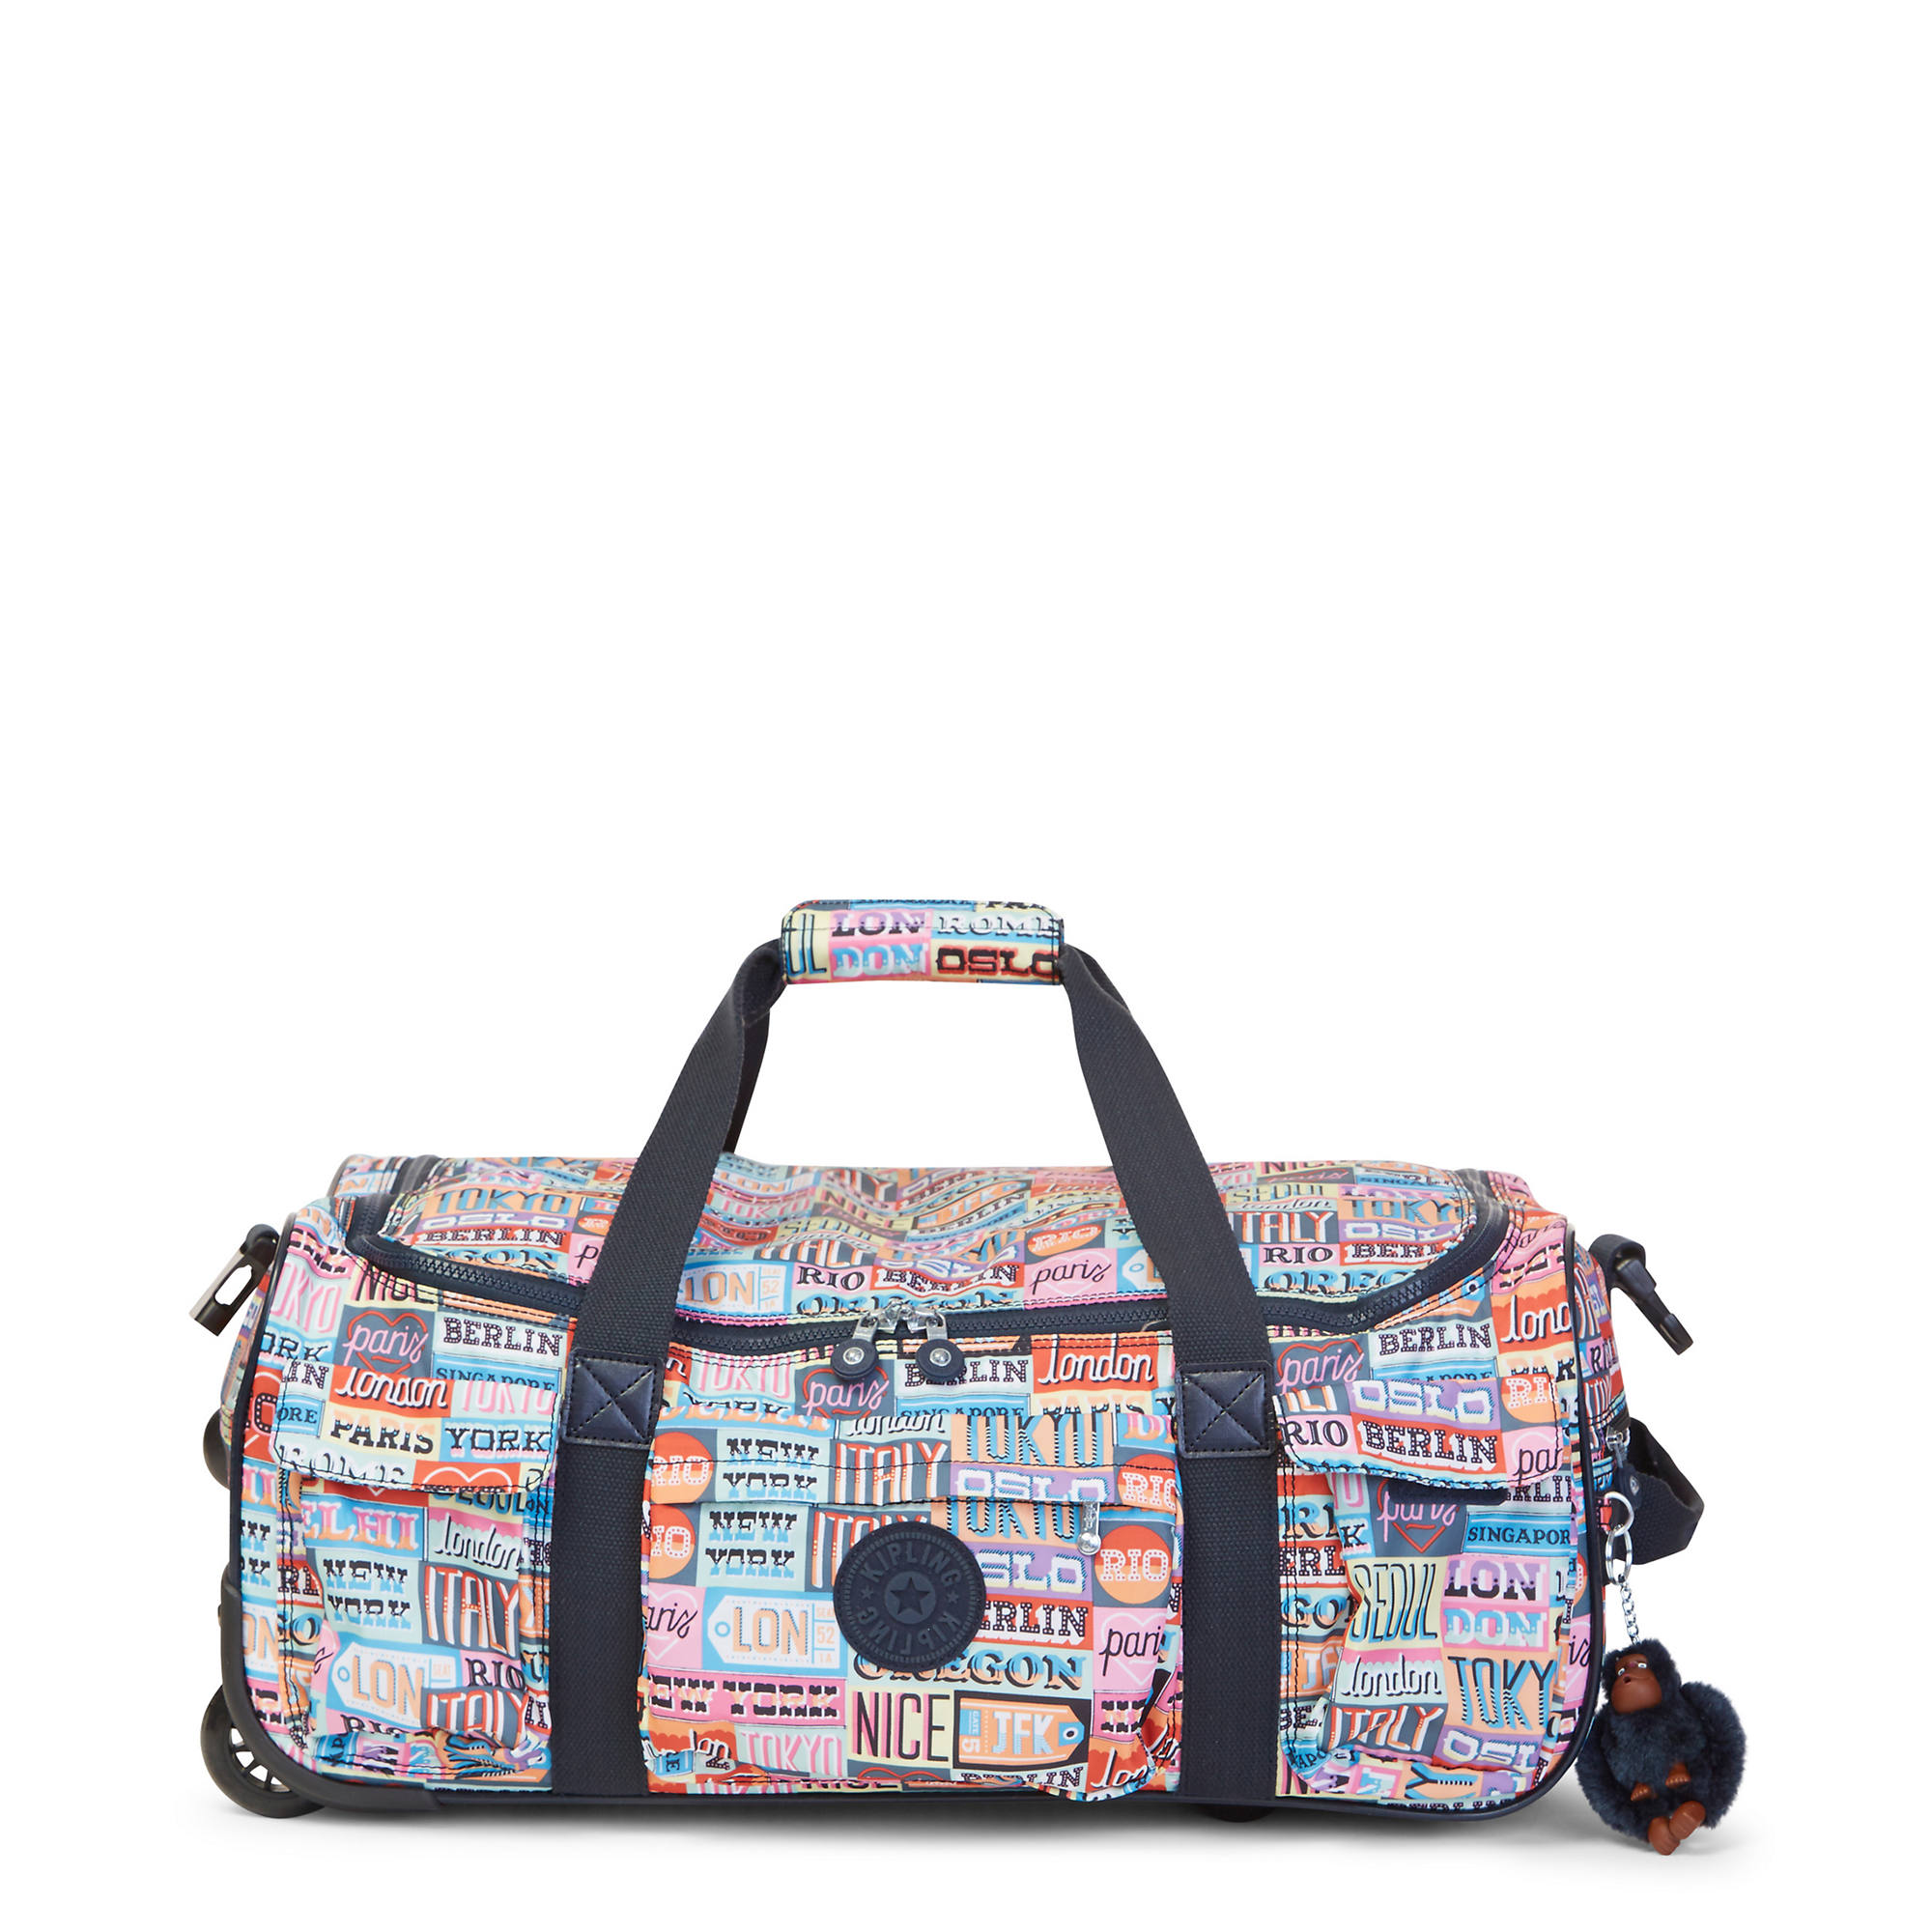 extreem software worm Discover Small Printed Wheeled Duffel Bag | Kipling